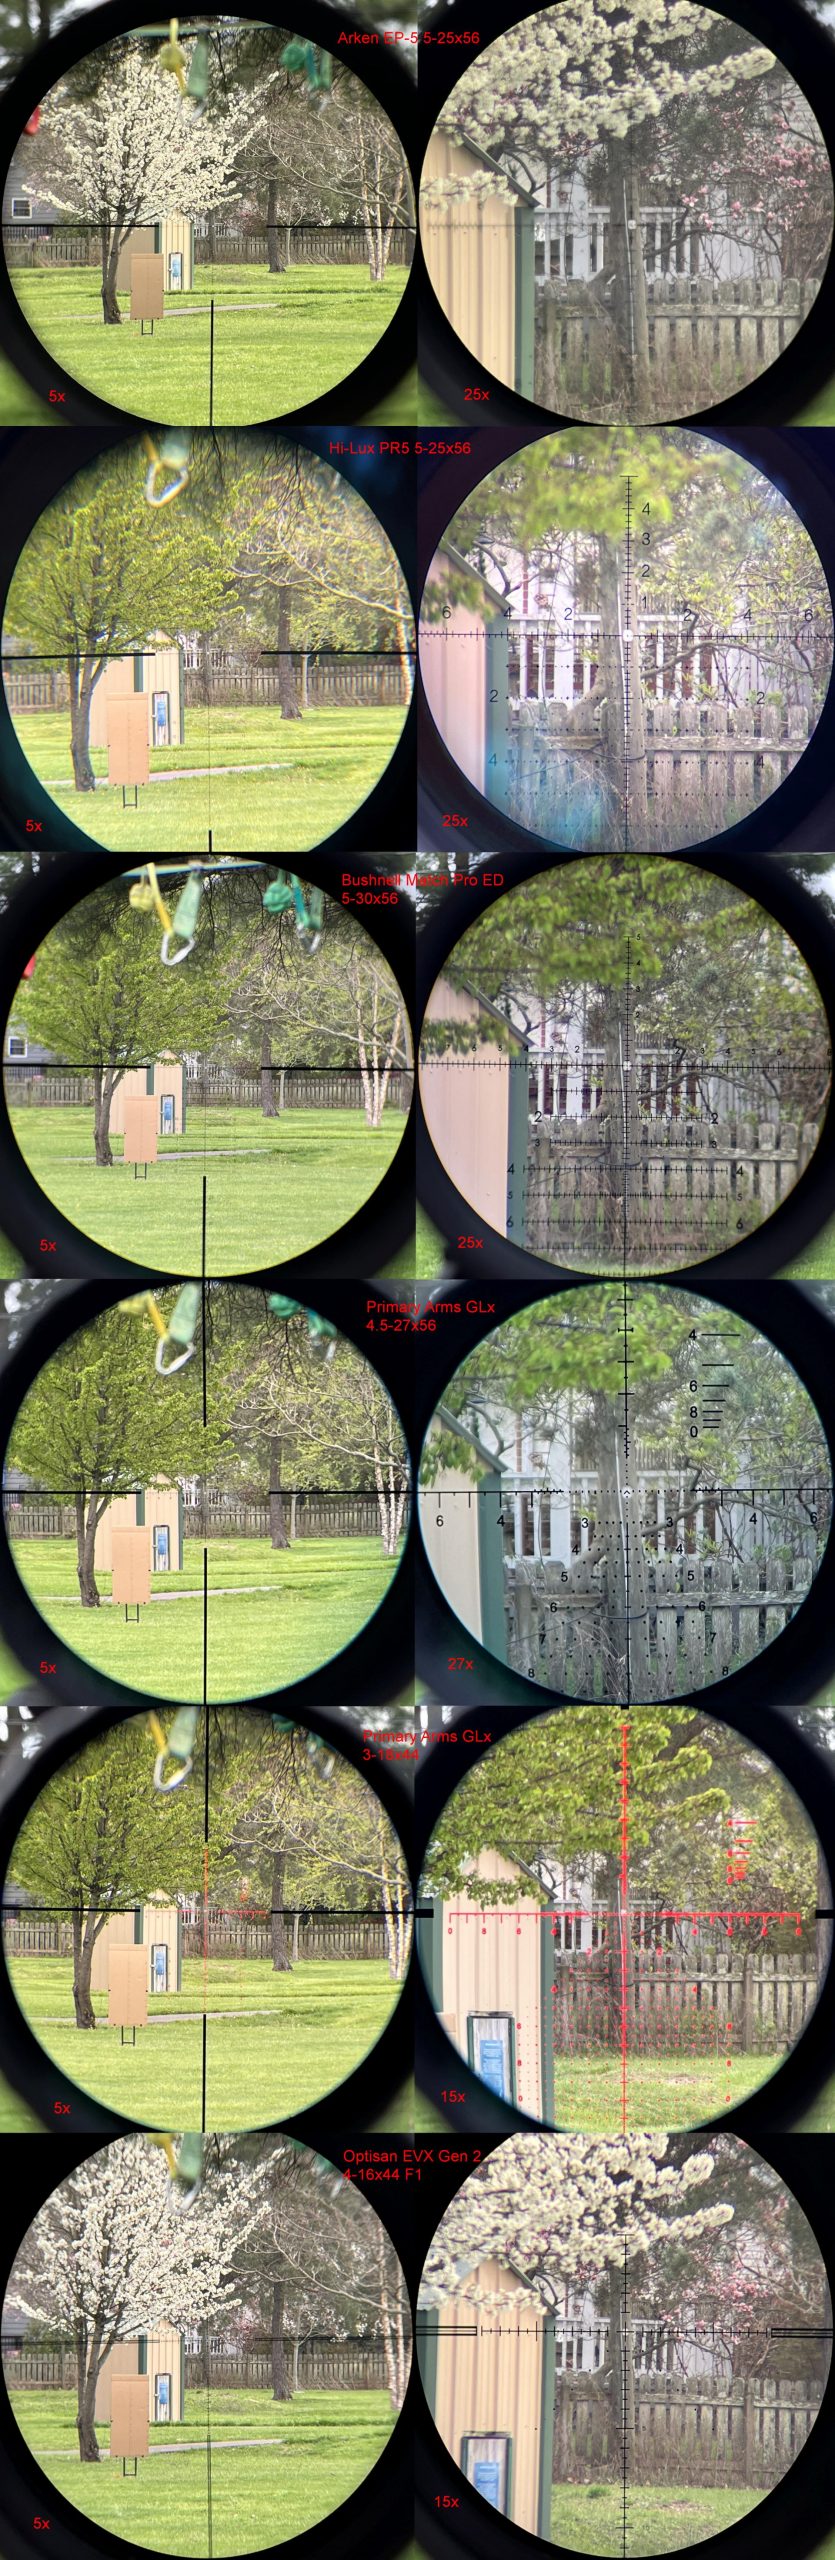 Field of view comparison with this year’s sub-$1K long range rifle scopes from top to bottom:  Arken EP-5 5-2556, Hi-Lux PR5 5-25x56, Bushnell Match Pro ED 5-30x56, Primary Arms GLX 4.5-47x56, Primary Arms GLX 3-18x44, and Optisan EVX Gen 2 4-16x44 F1